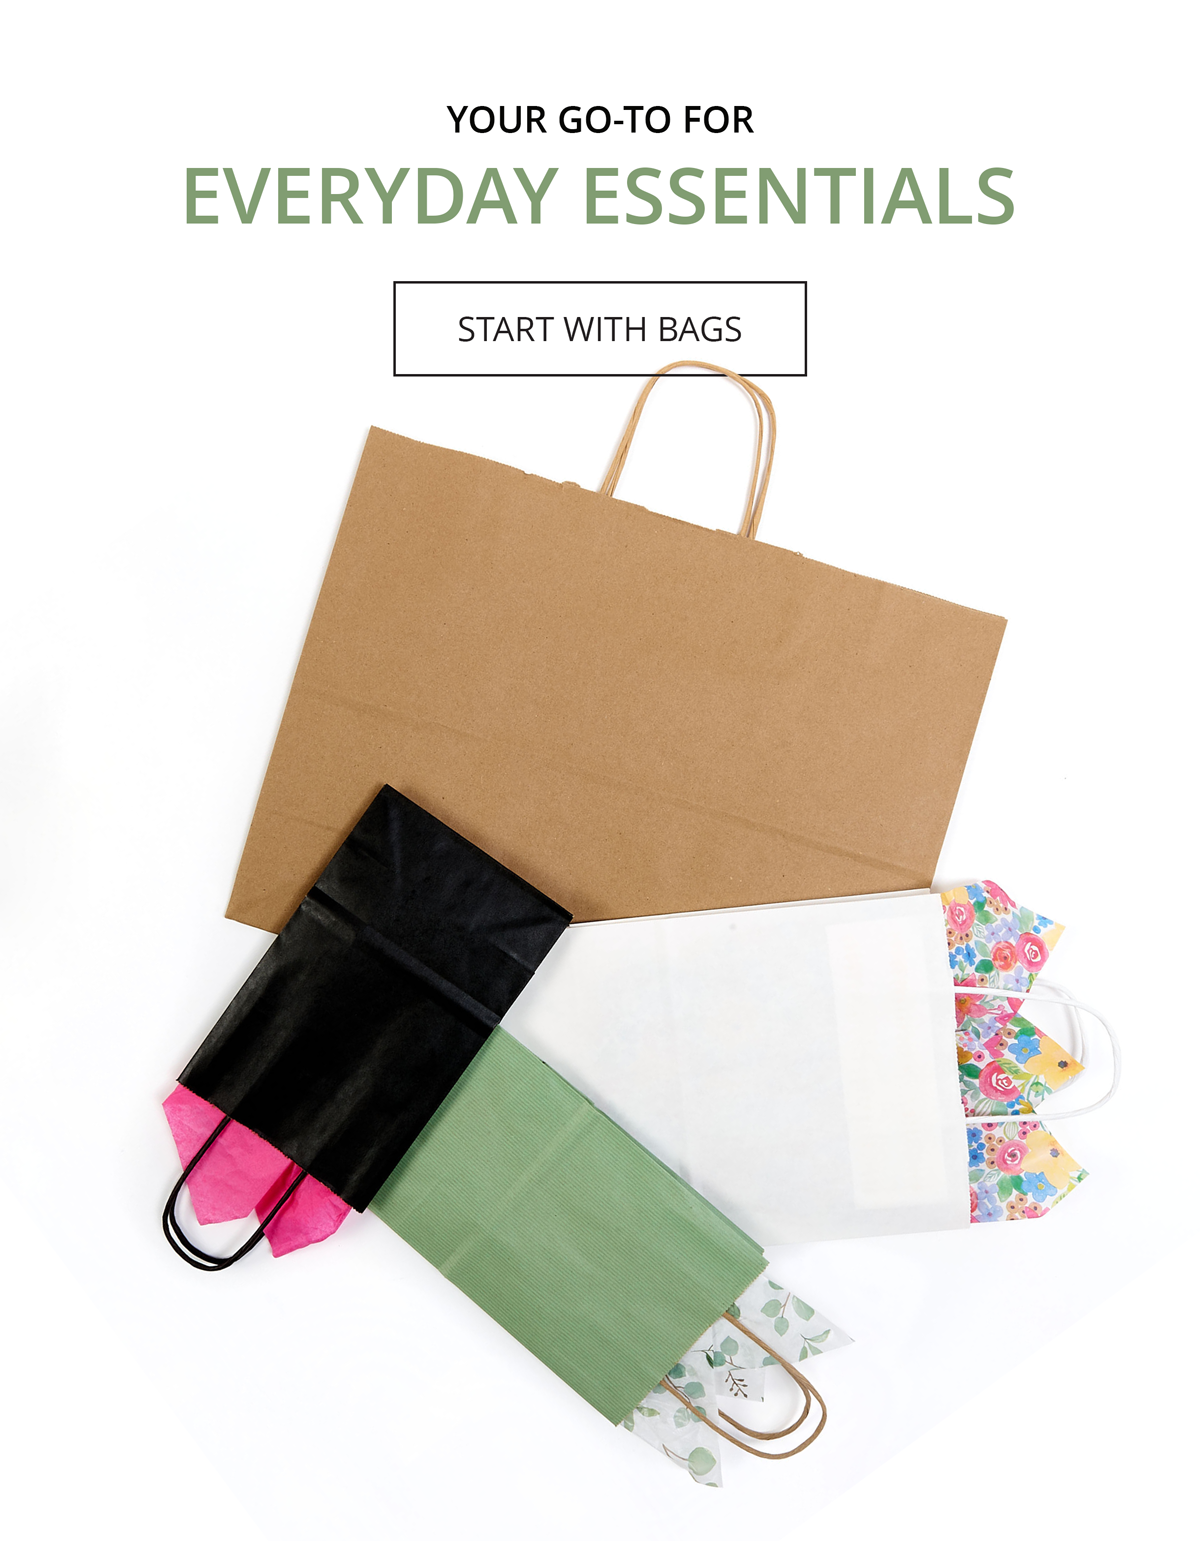 Your go-to for everyday essentials